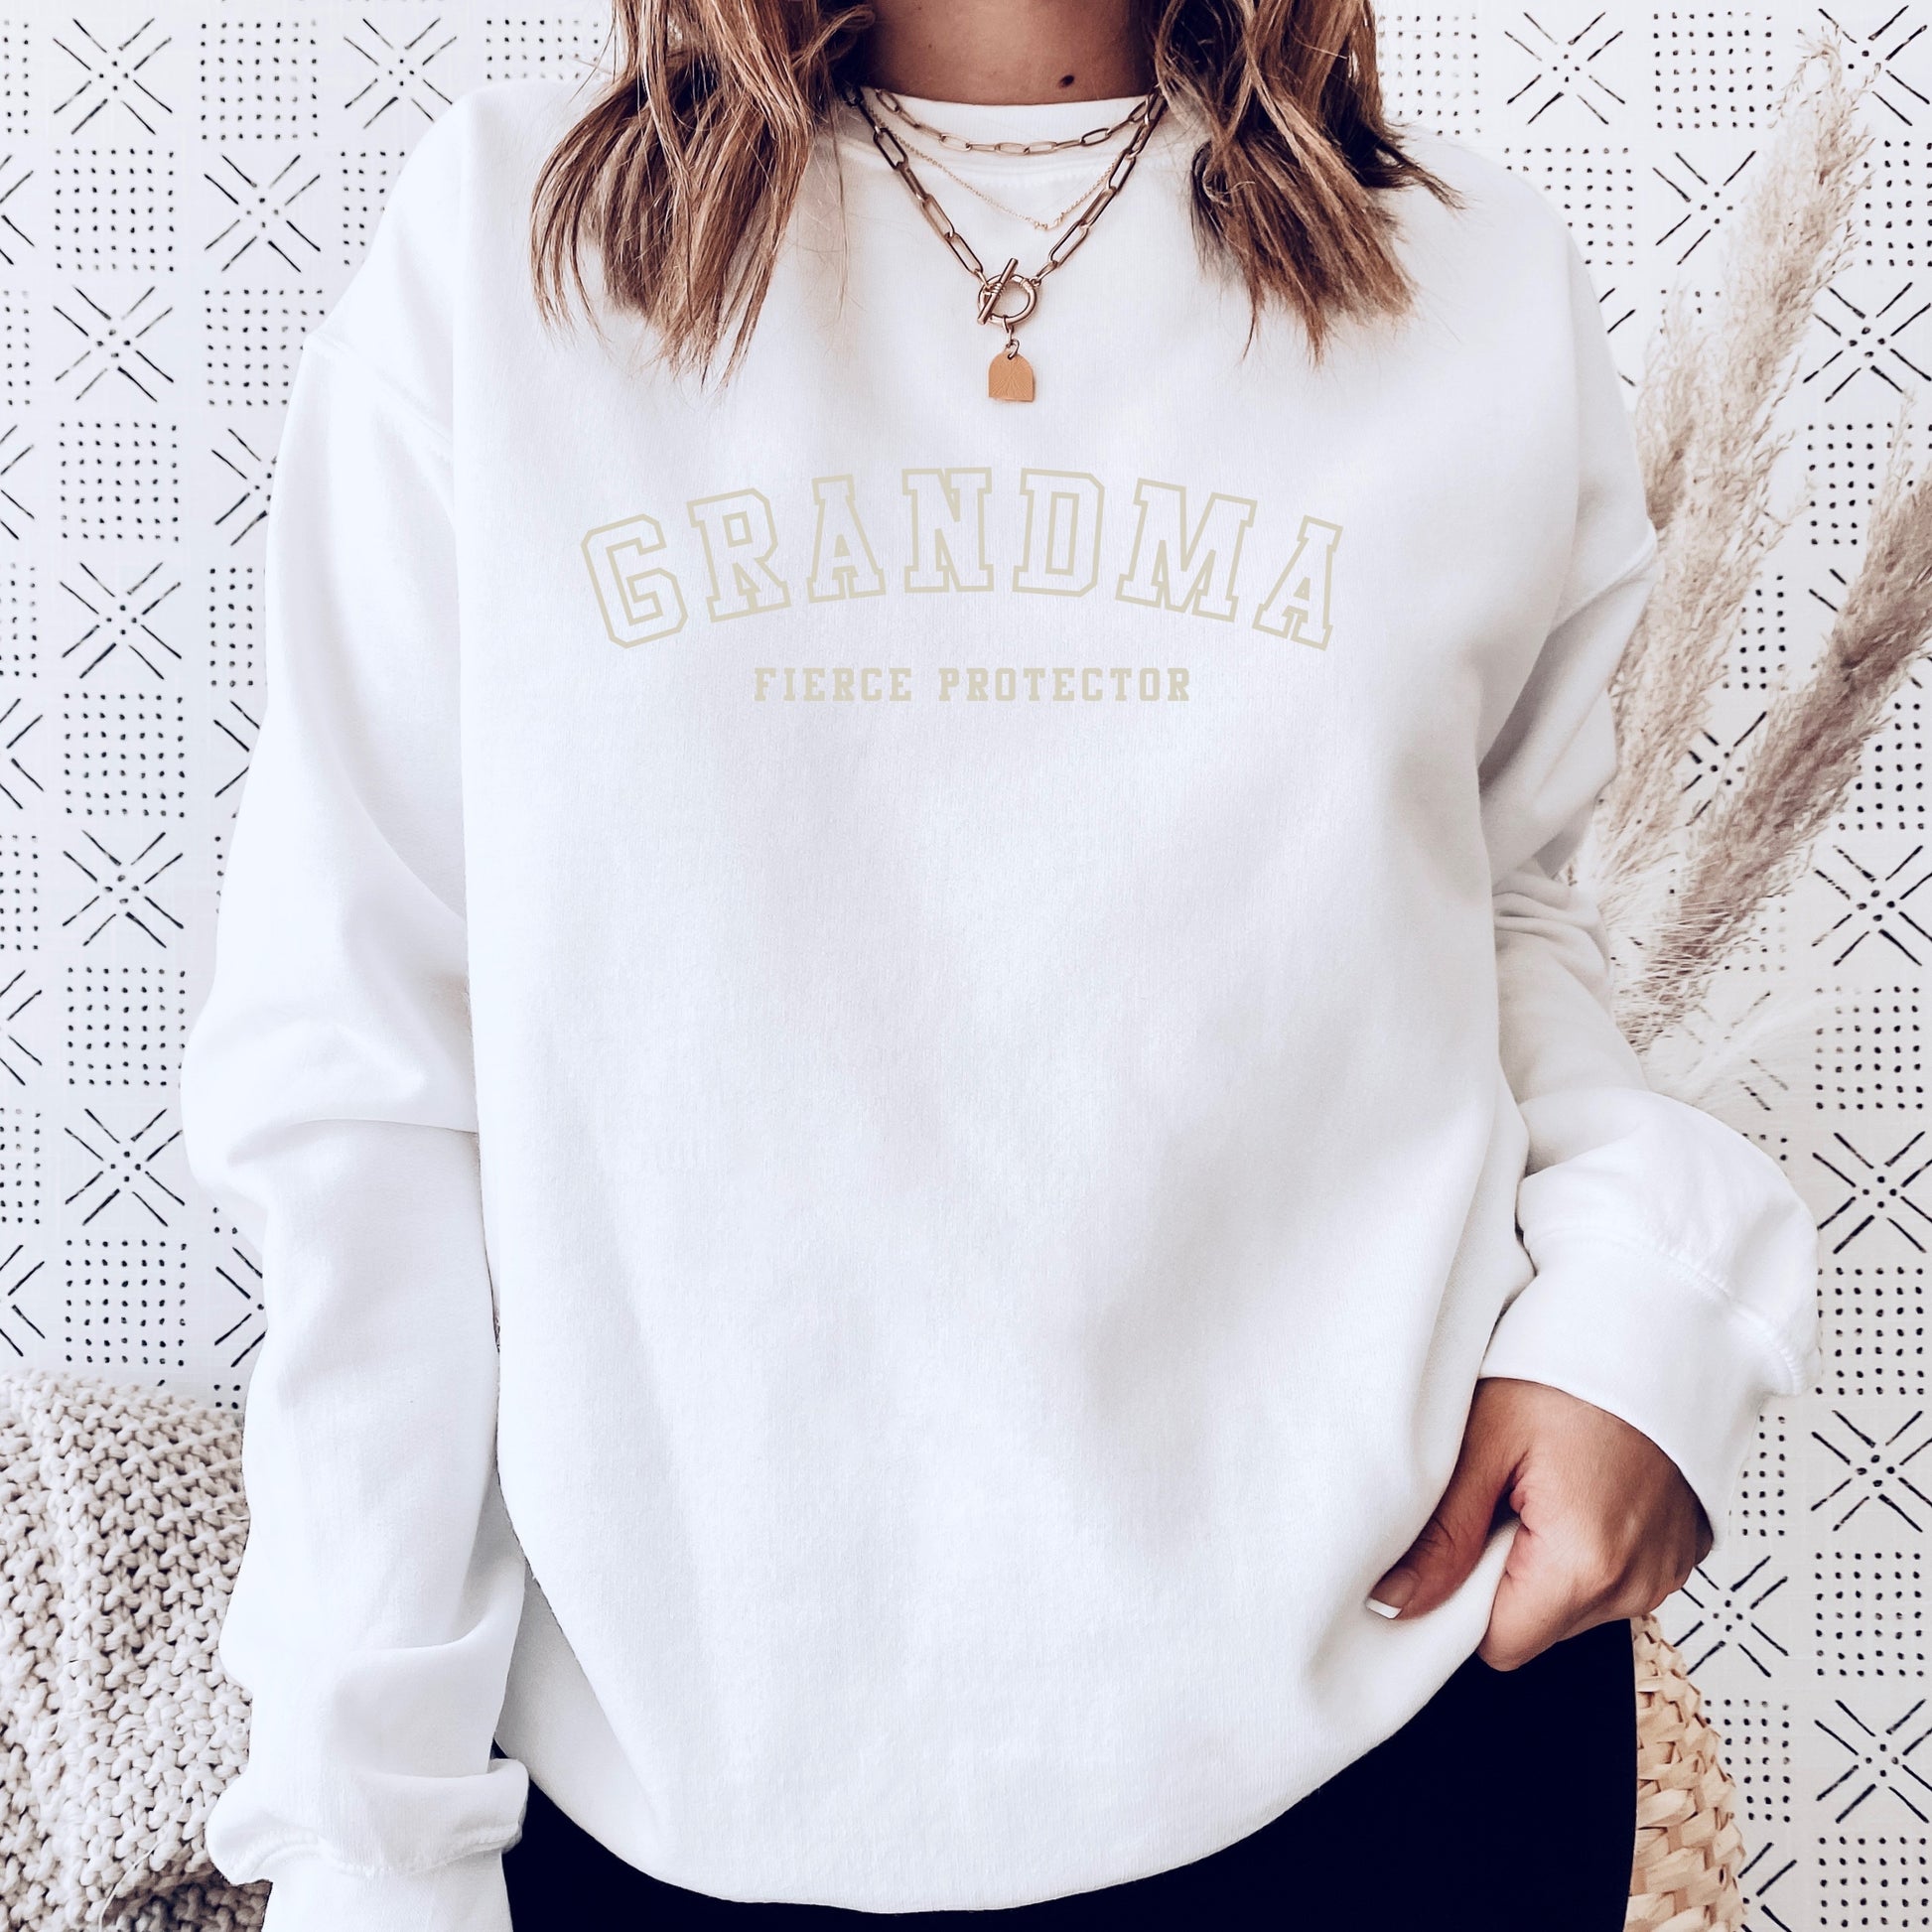 The front of the sweatshirt proudly displays the phrase Grandma Fierce Protector in a bold and eye catching font. This message serves as a reminder that we reject victim blaming and support those who have faced injustice. Your grandma can wear her strength proudly, embracing both comfort and empowerment.